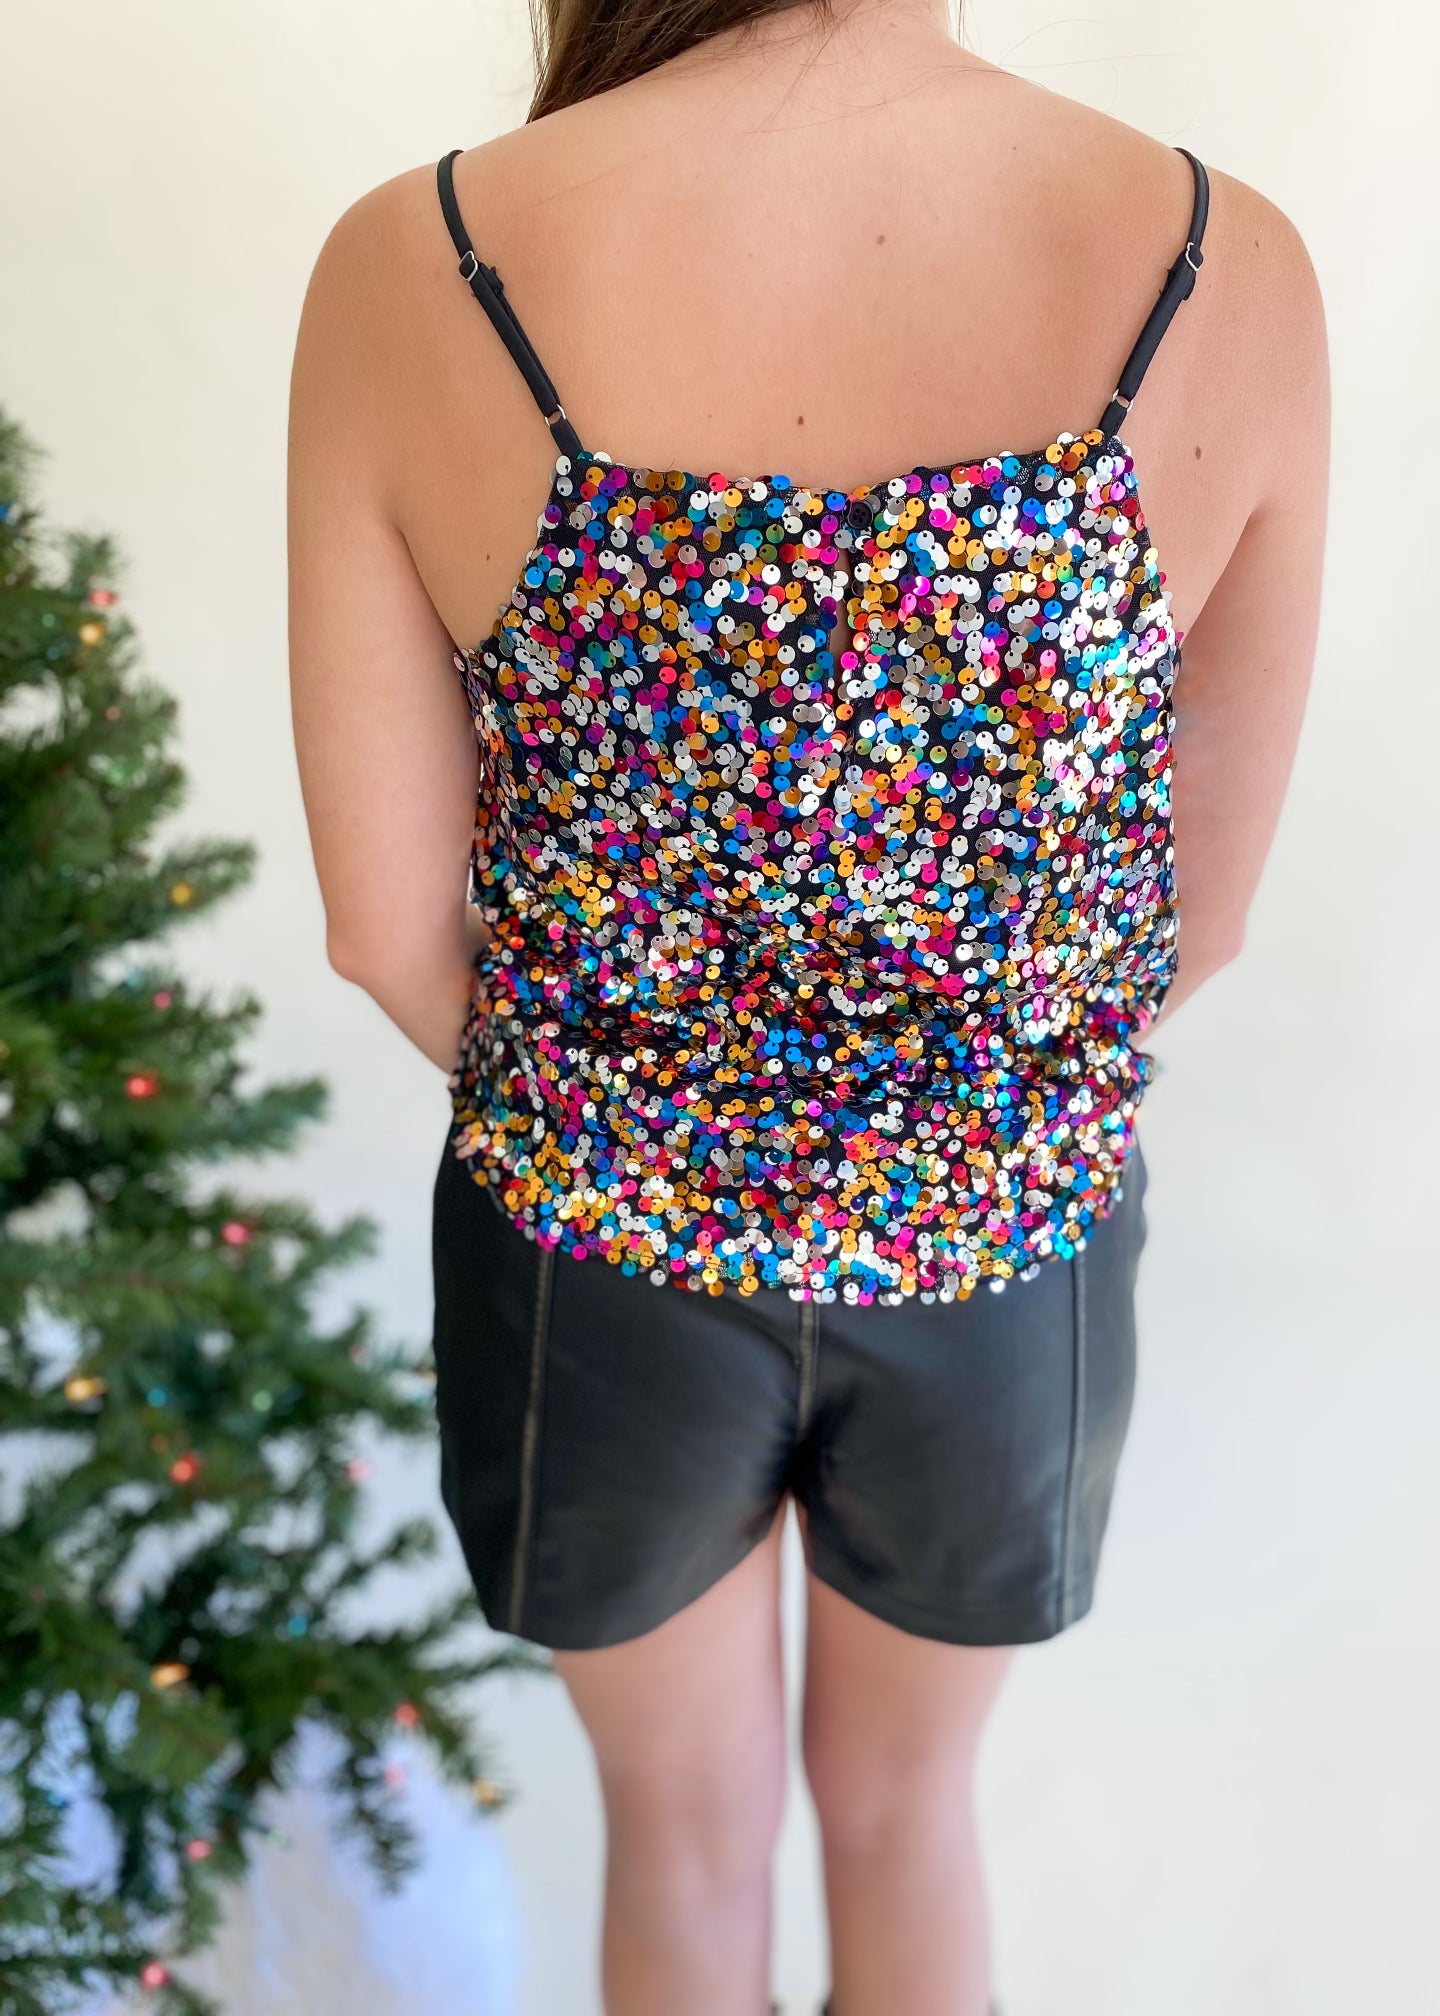 Party With Me Sequin Multi Colored Tank